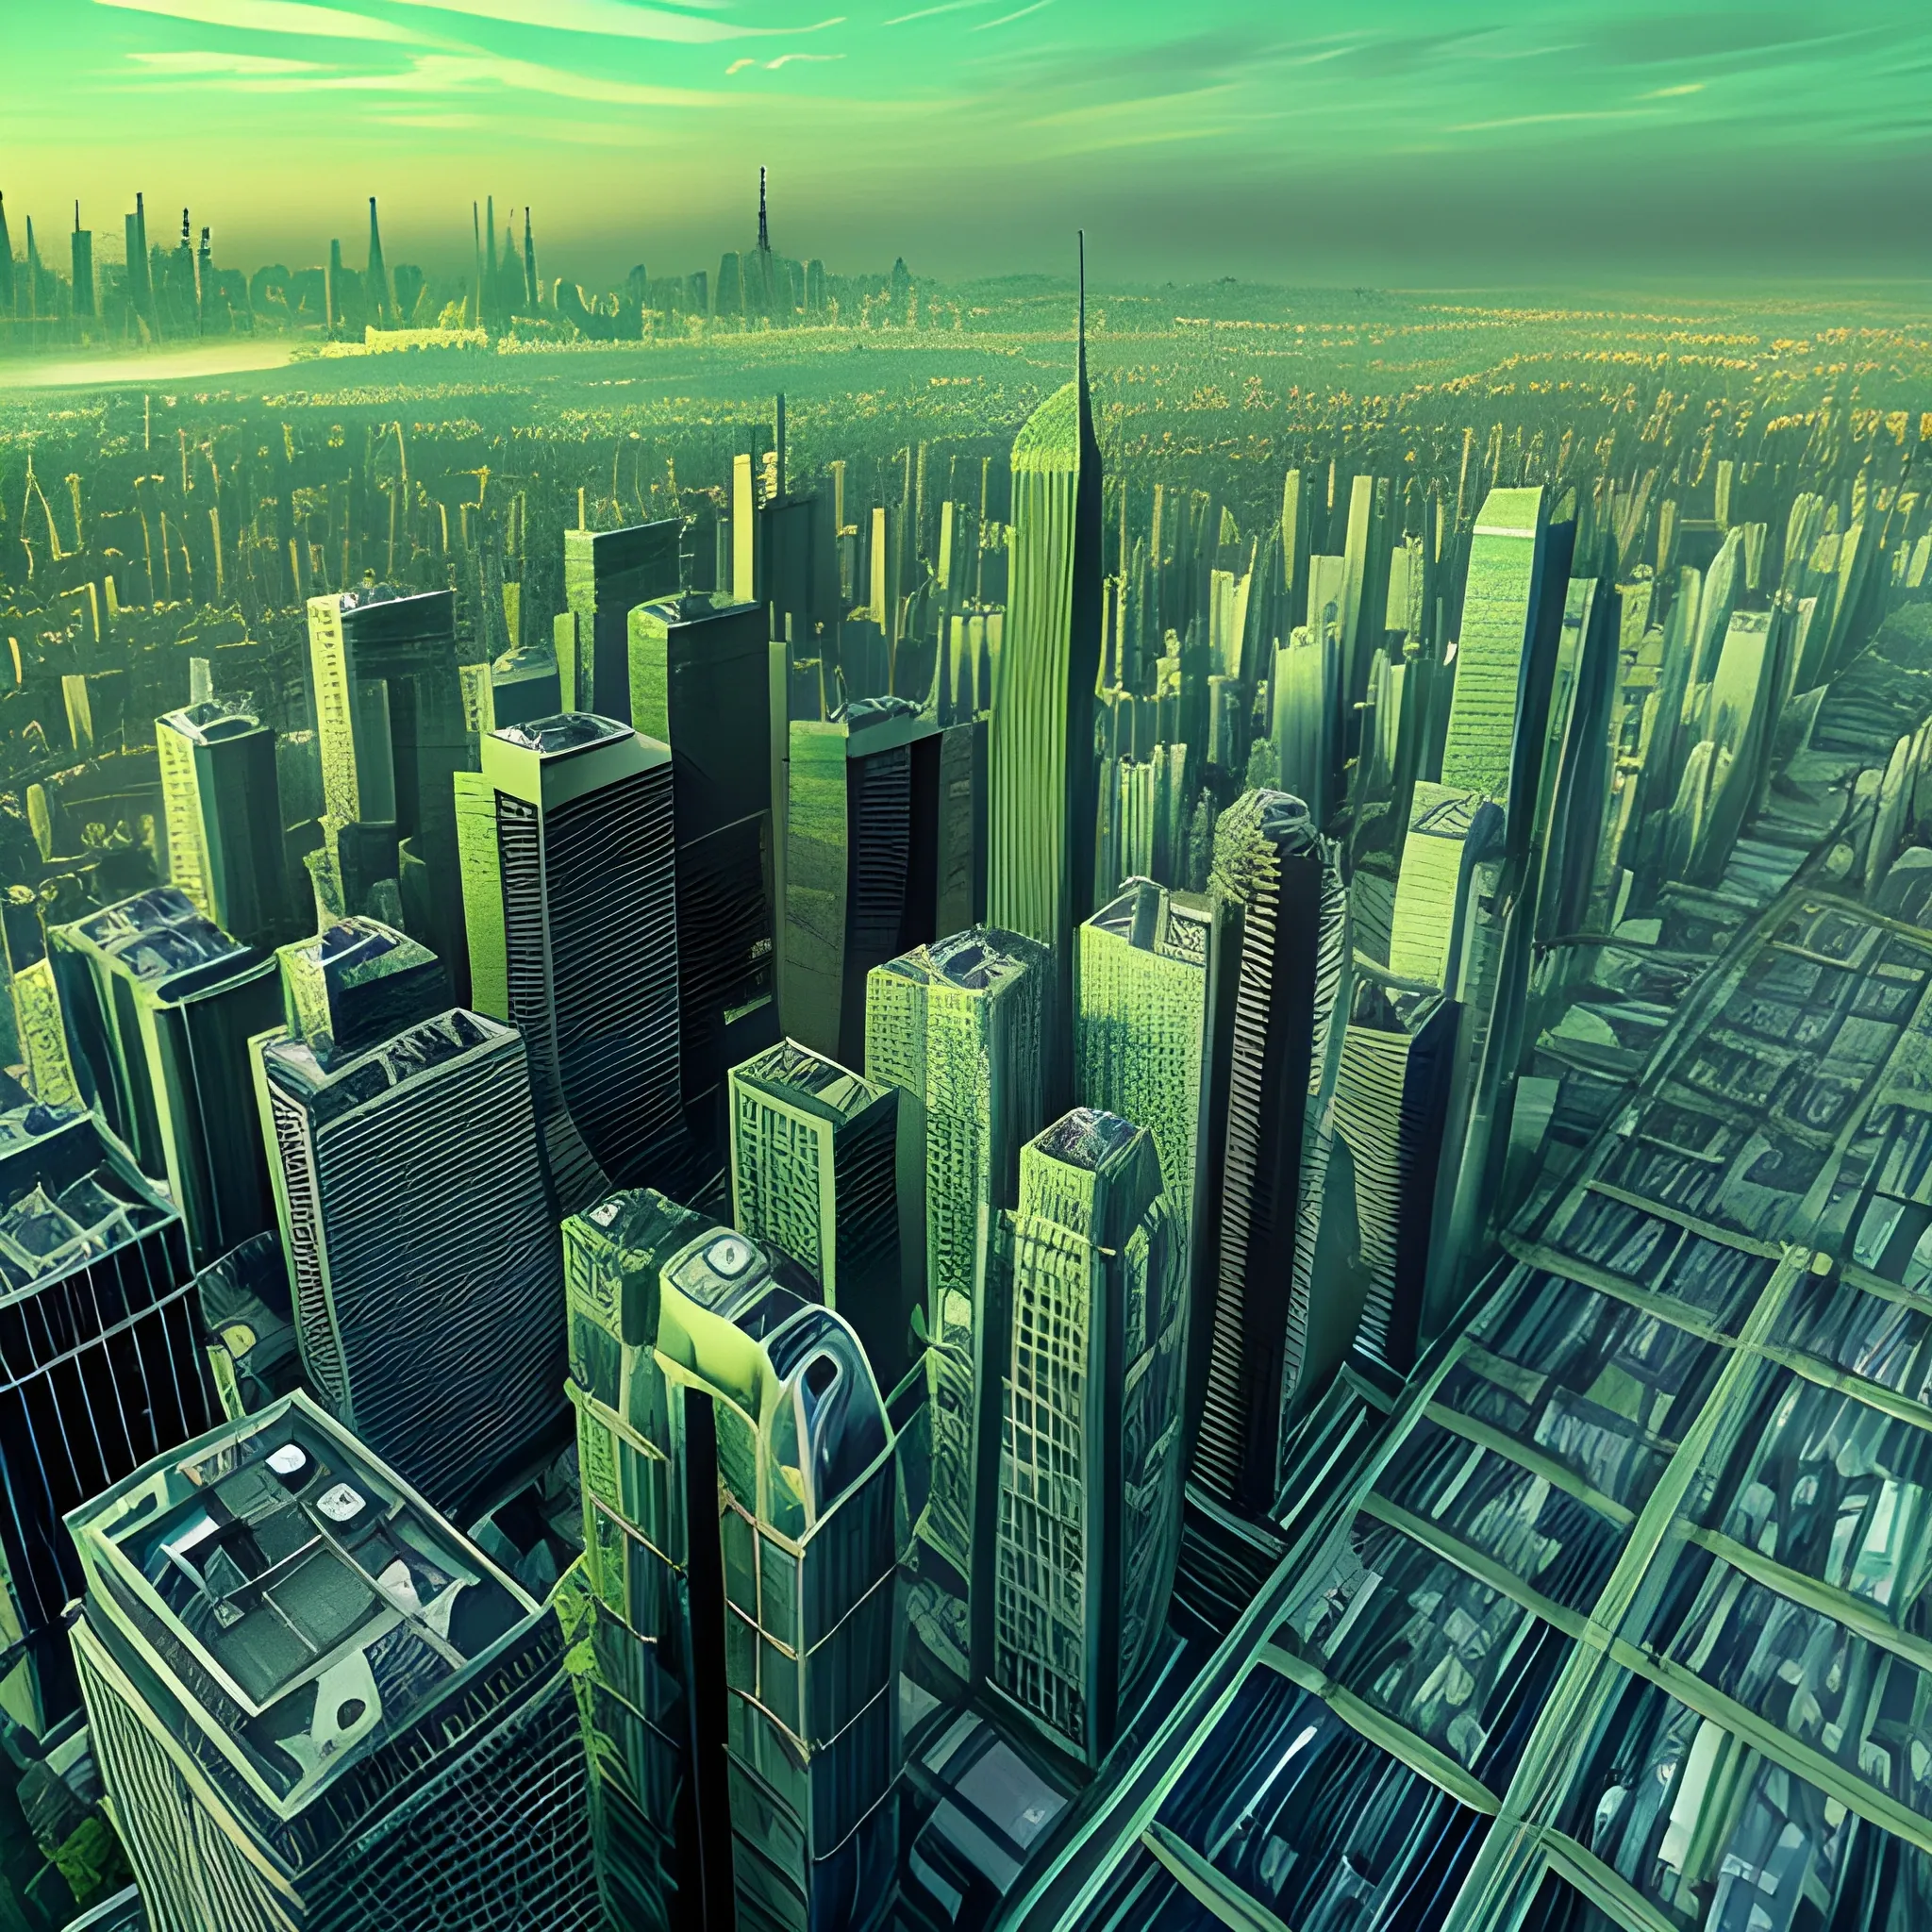 A ghostly city with high buildings and a green skyline